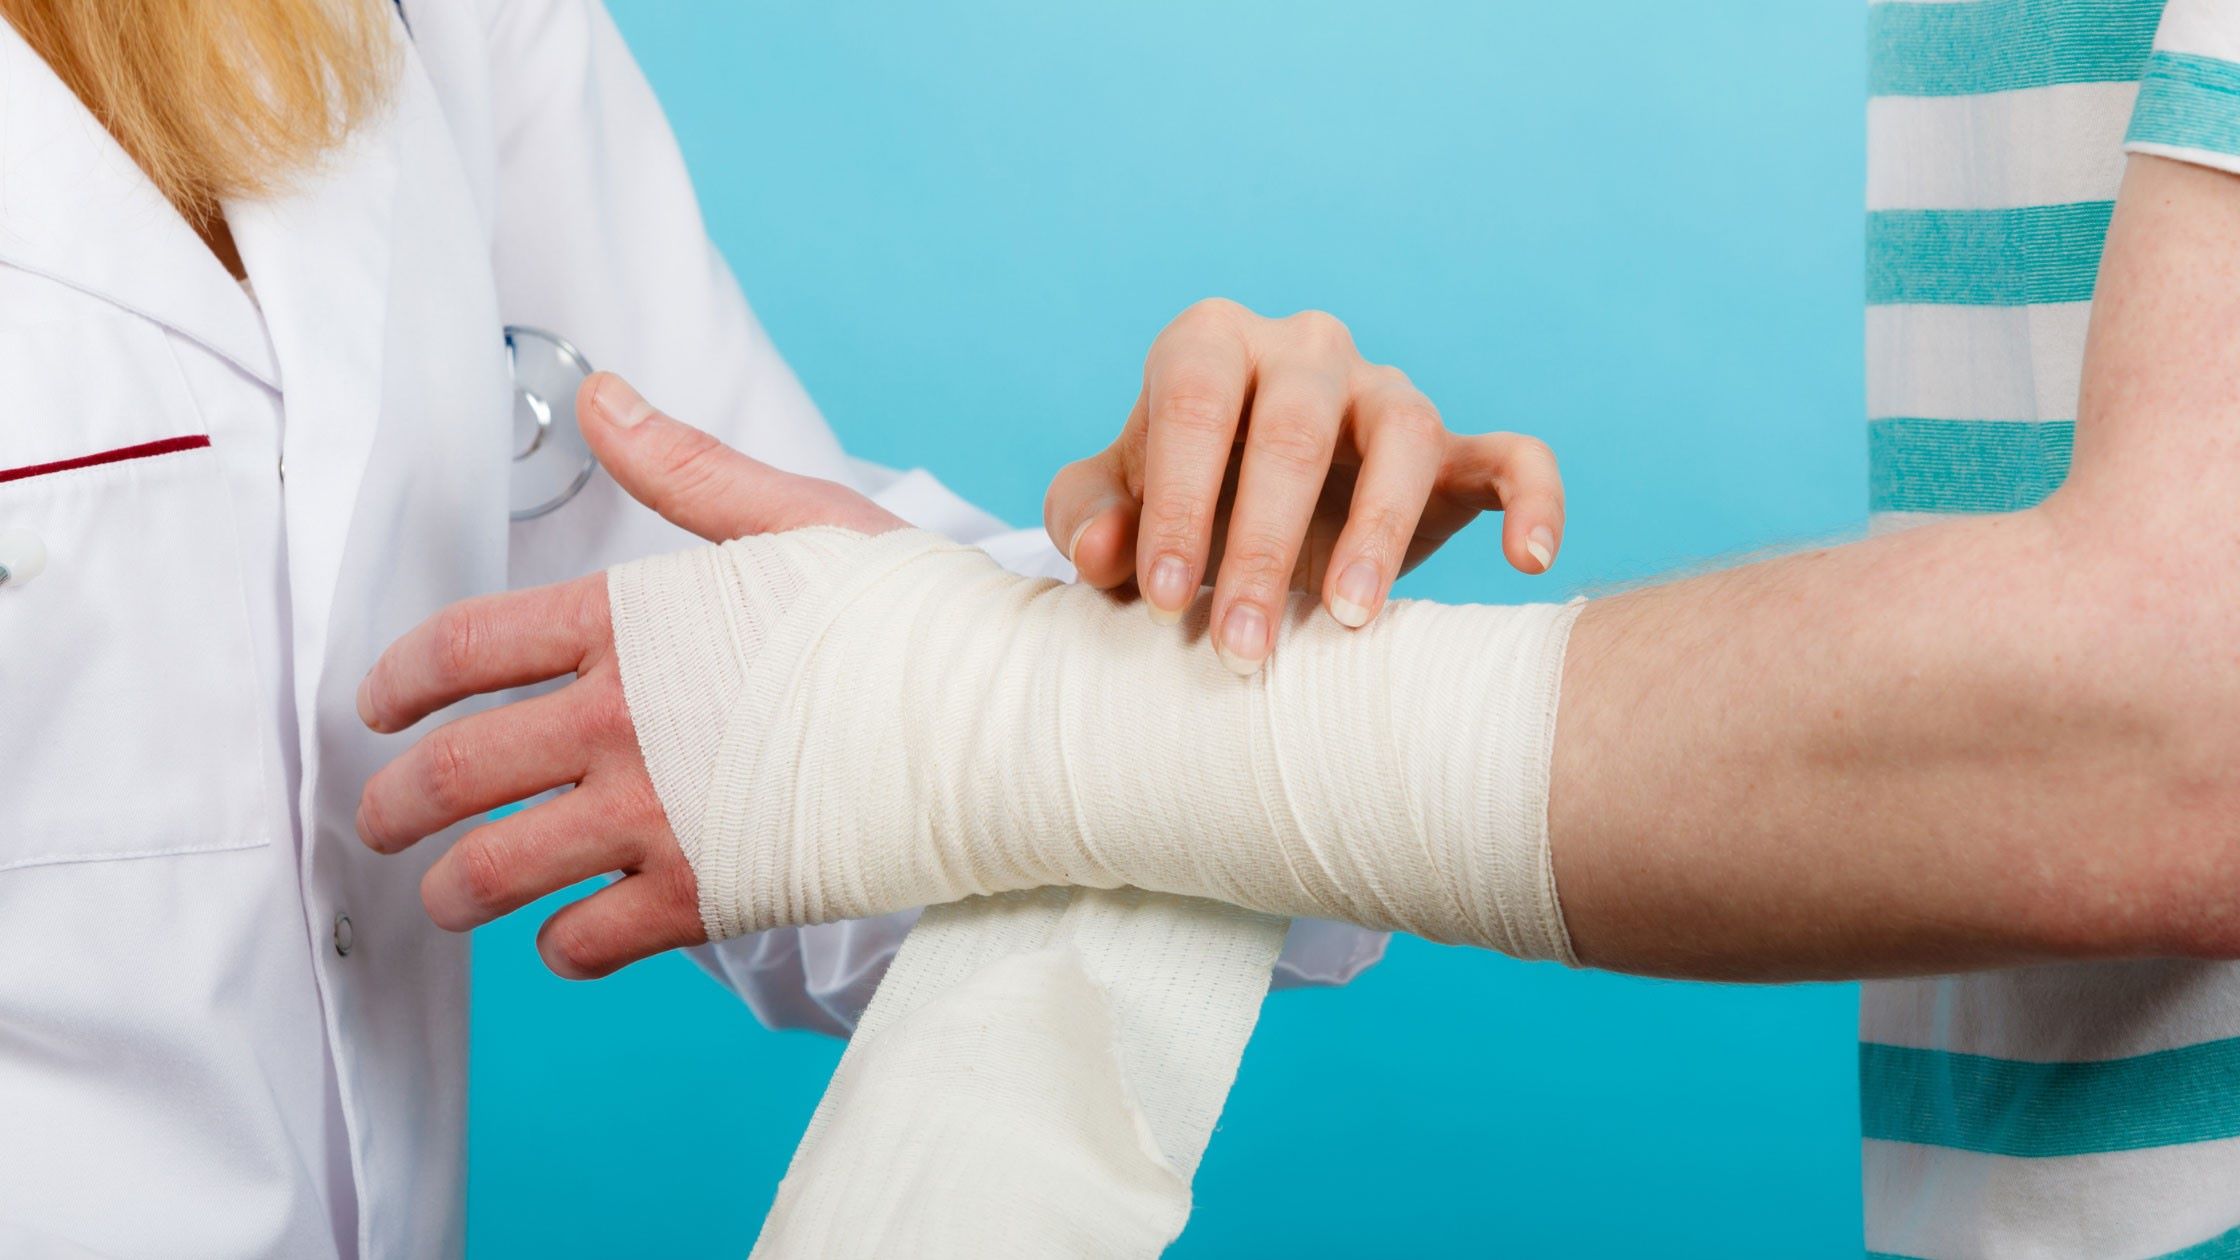 How To Determine If You Have A Wrist Sprain Or Break